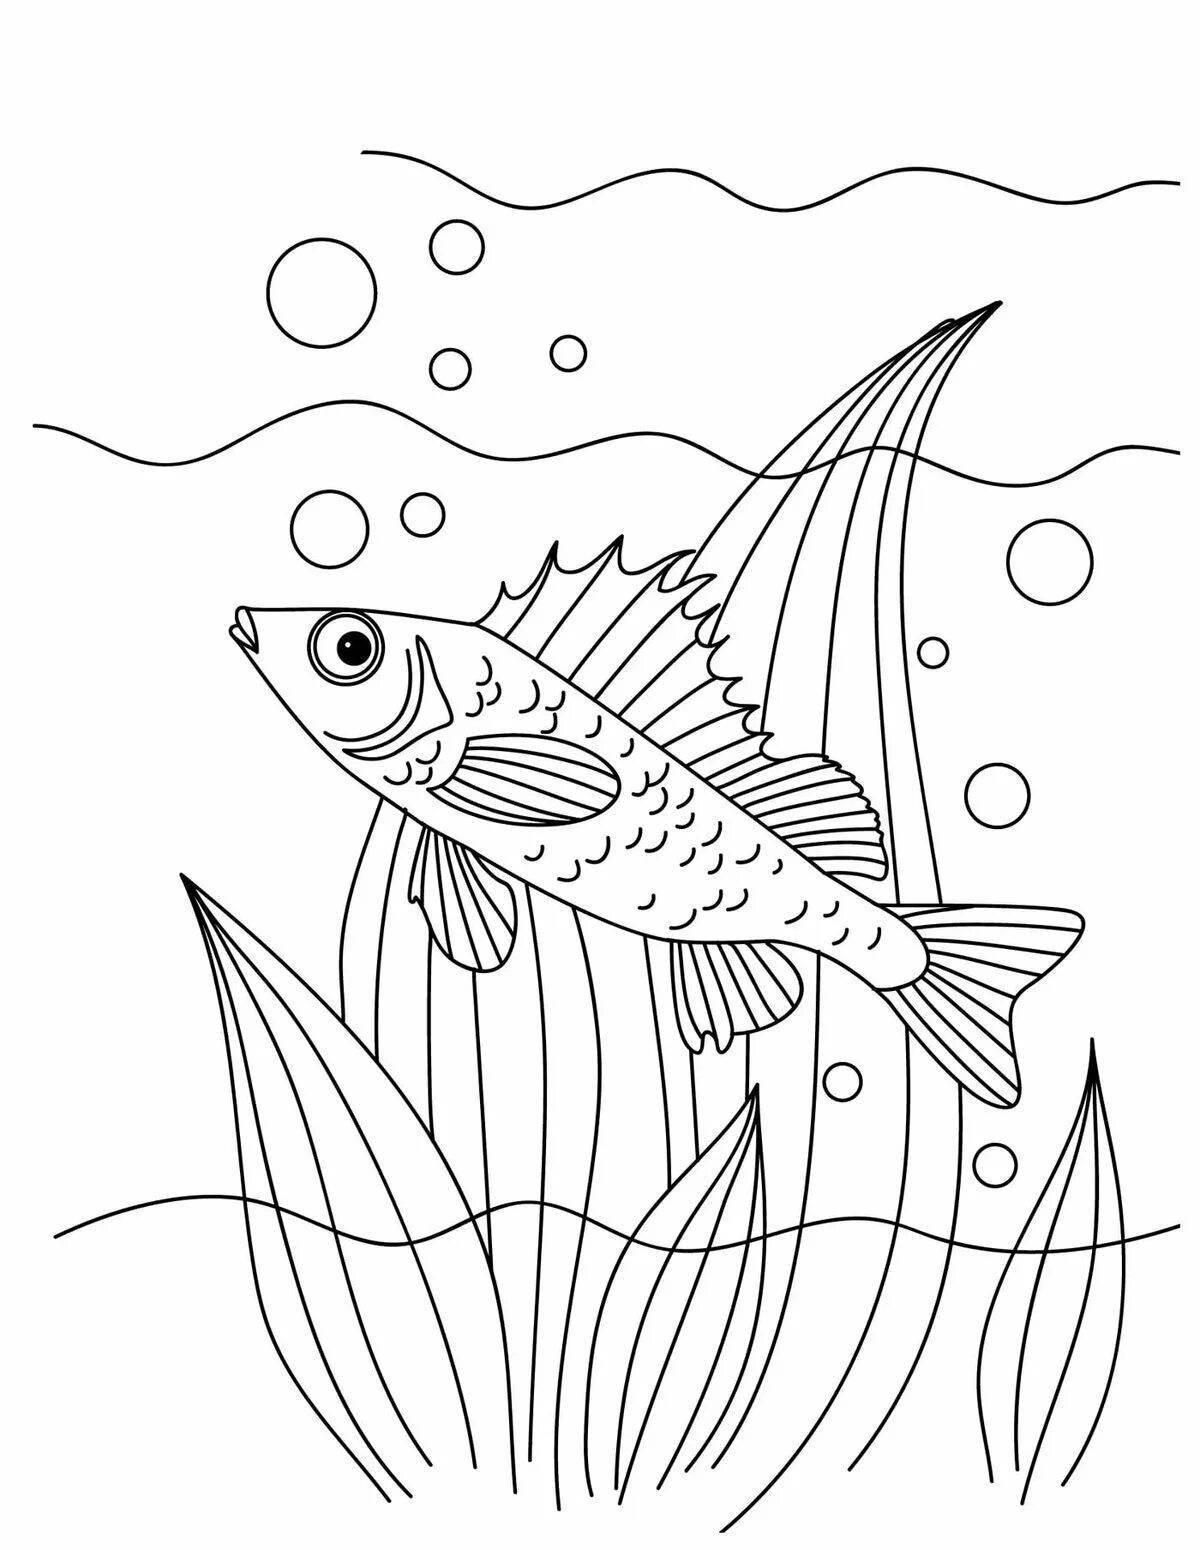 Coloring pages for children 